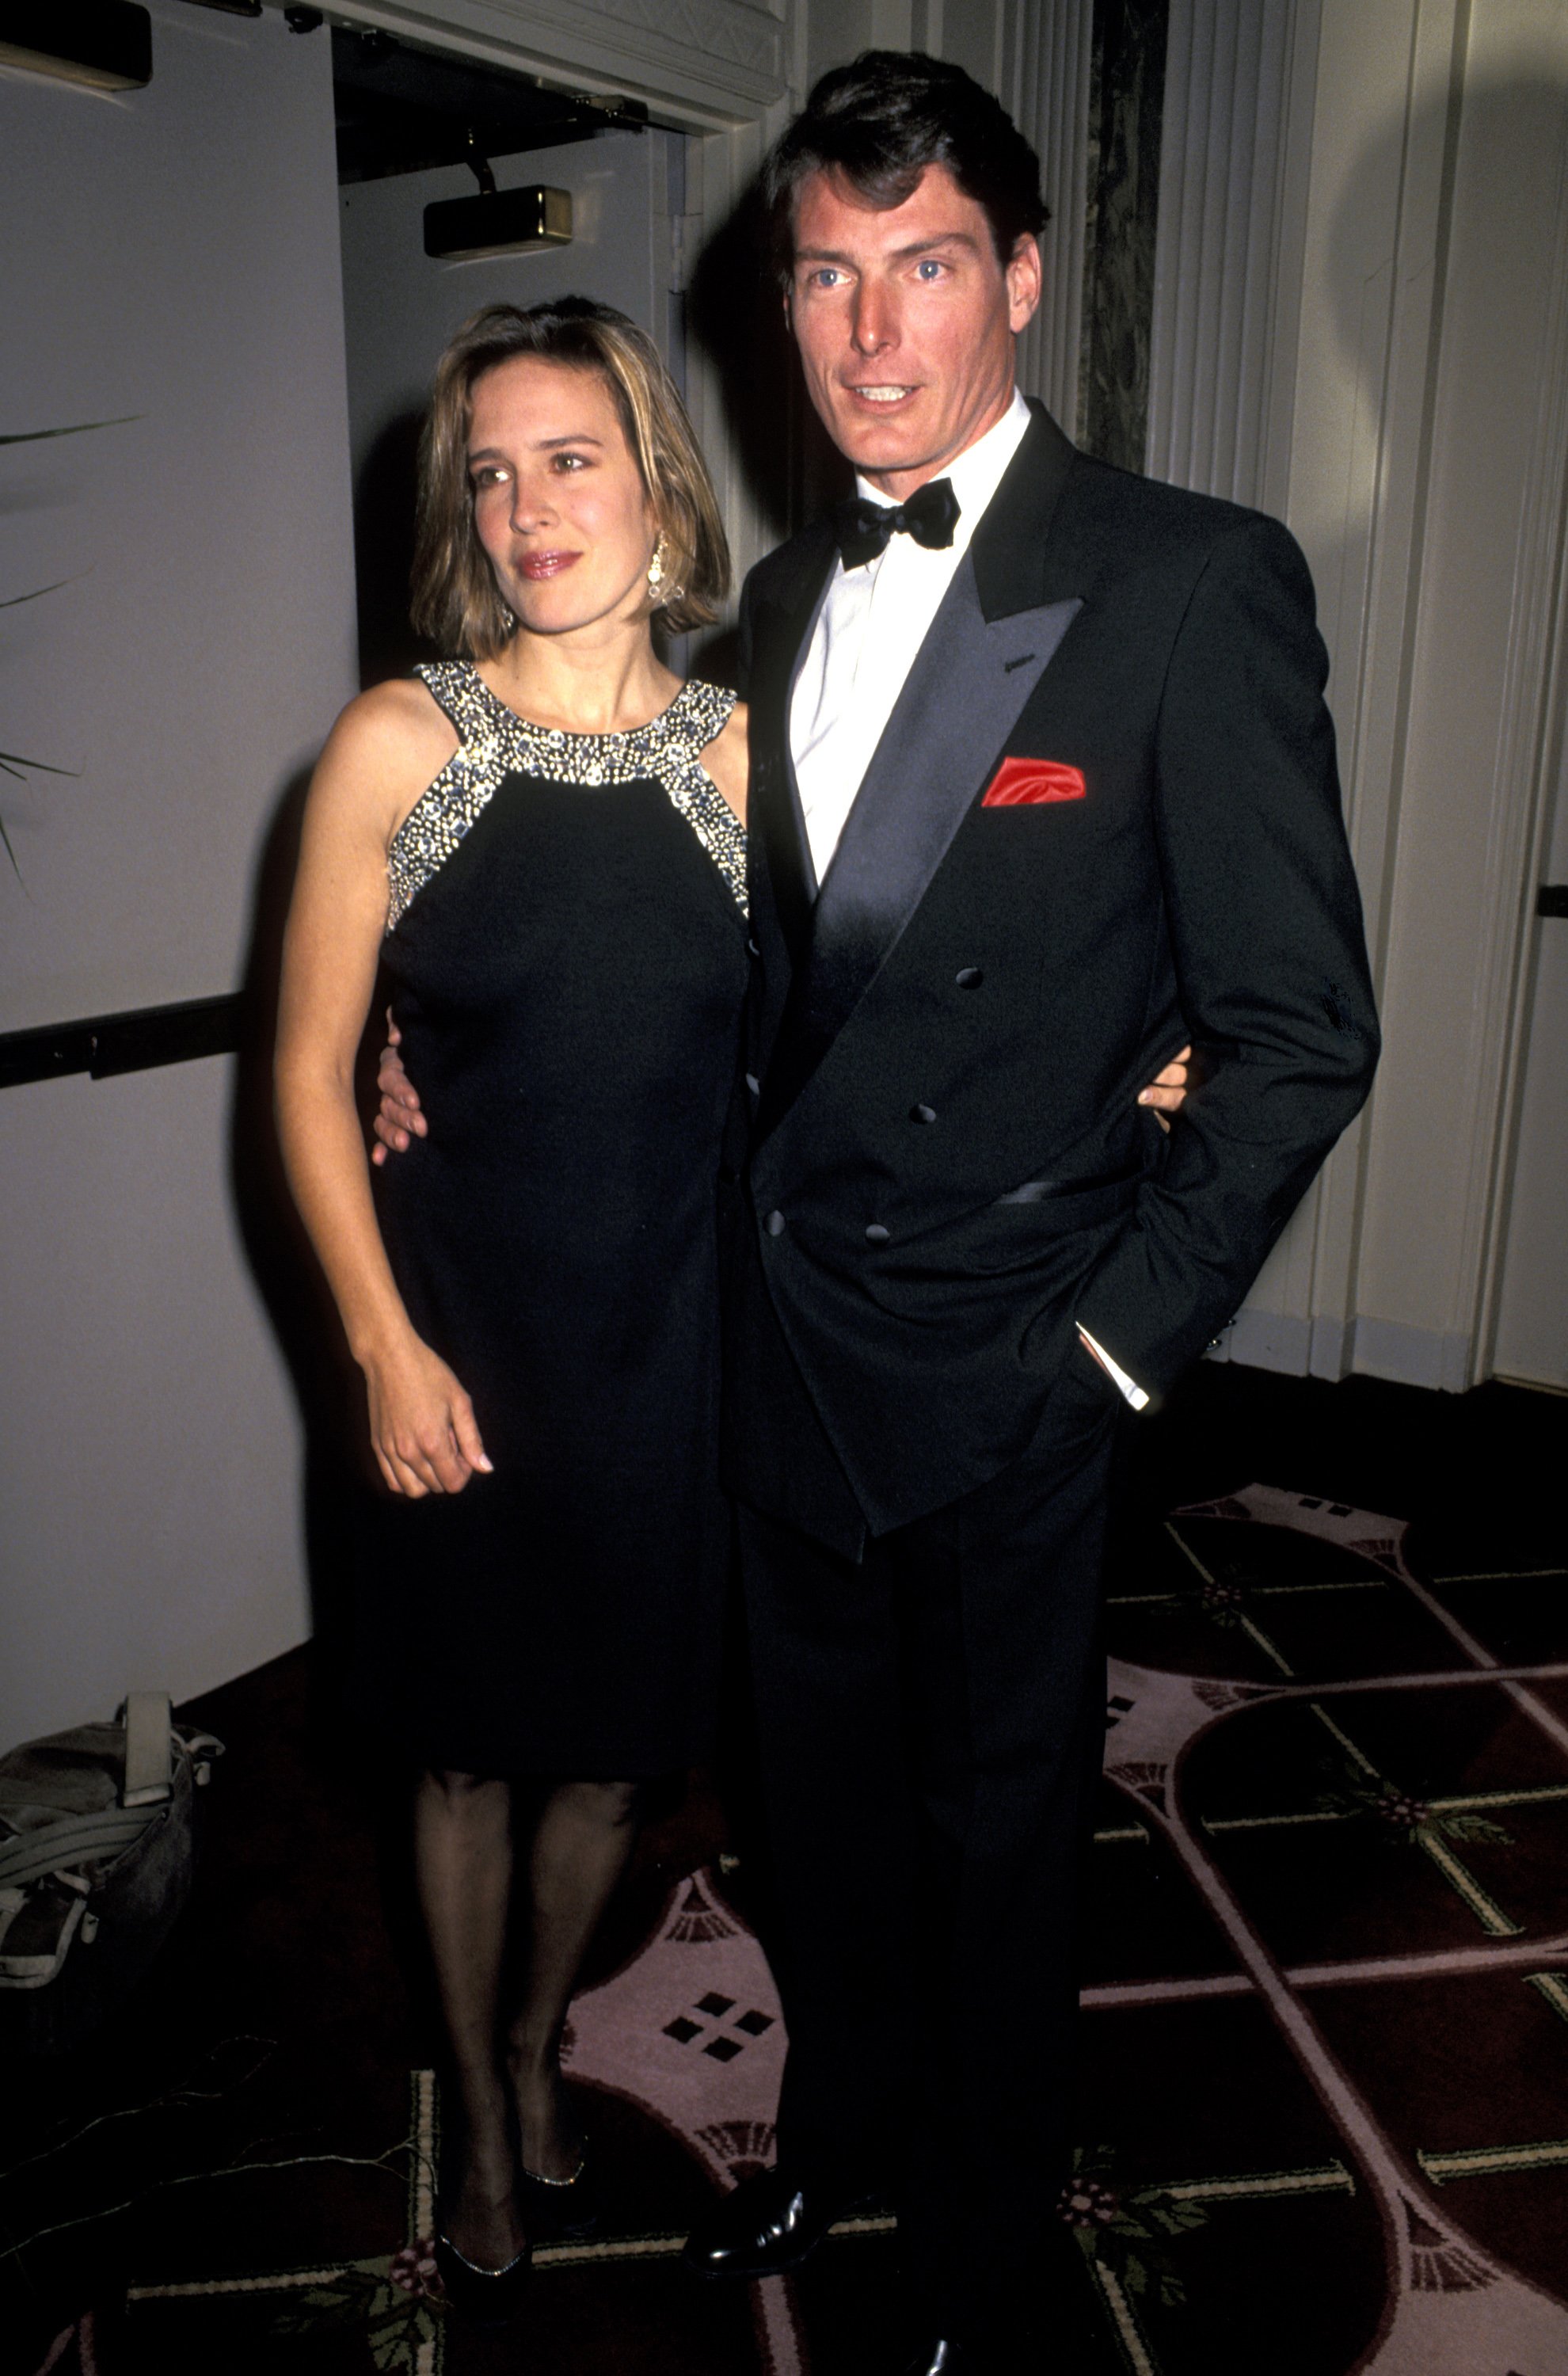 Dana Reeve and Christopher Reeve at Waldorf Hotel in New York City, New York, United States. | Source: Getty Images